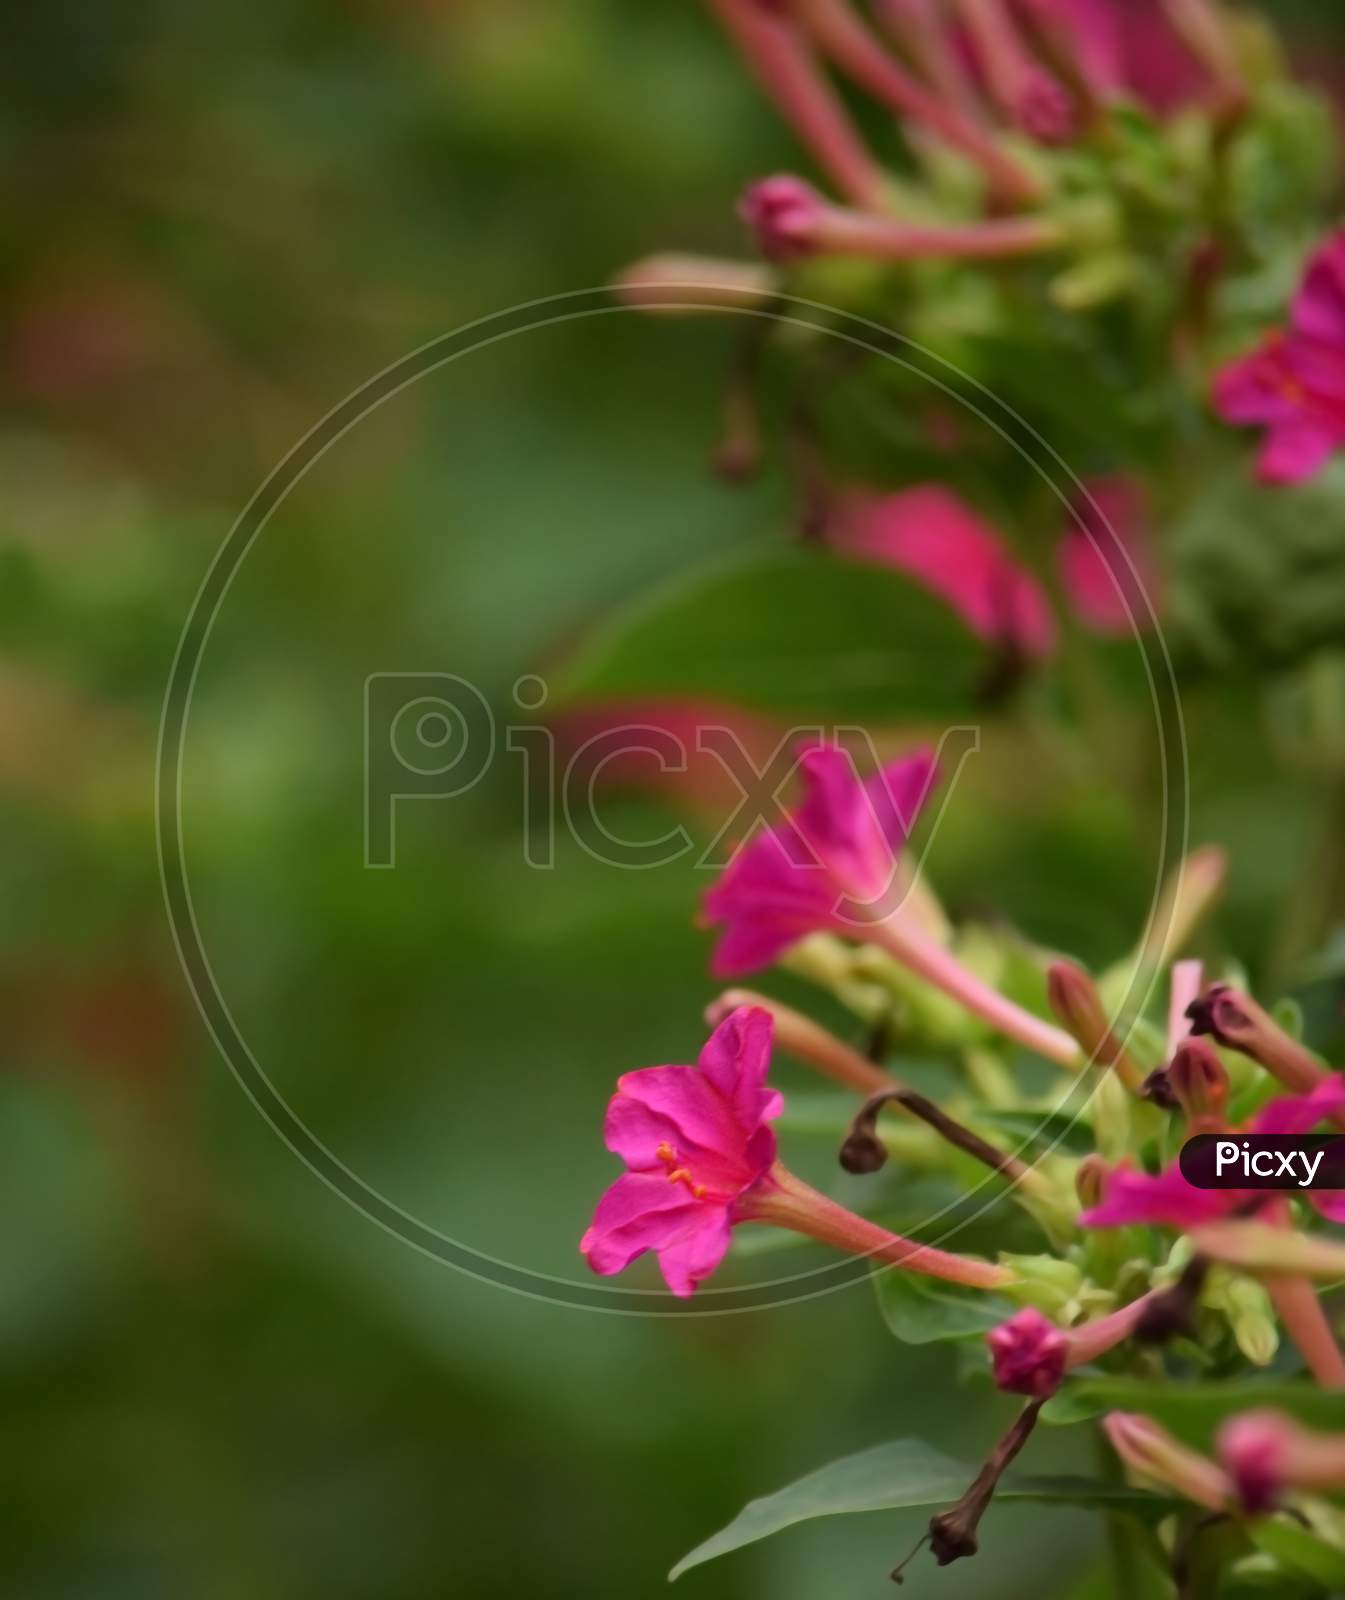 pink flower at outdoor with blurred background, side view